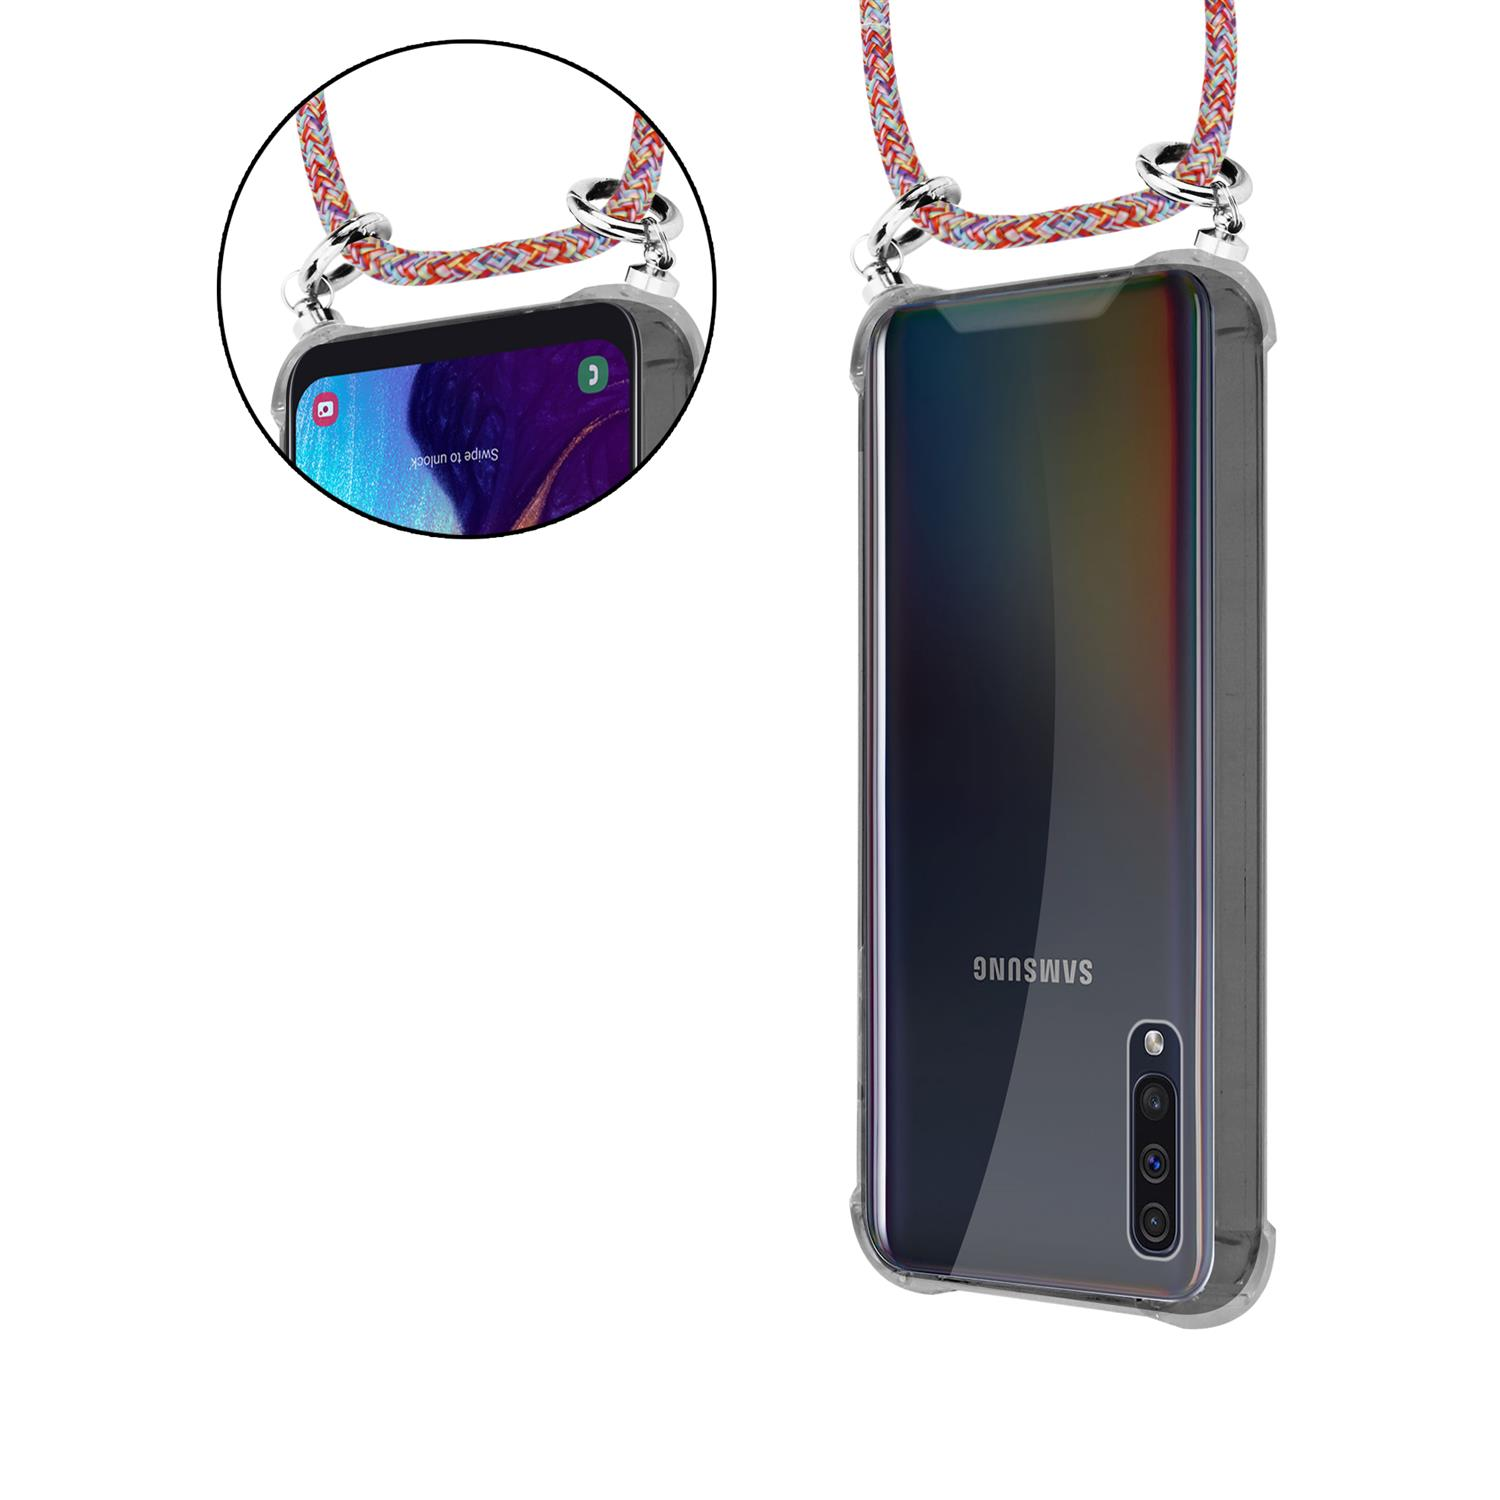 CADORABO Handy Kette abnehmbarer Galaxy 4G Samsung, Kordel Hülle, A30s, PARROT und Silber A50 Backcover, mit A50s / / Band Ringen, COLORFUL